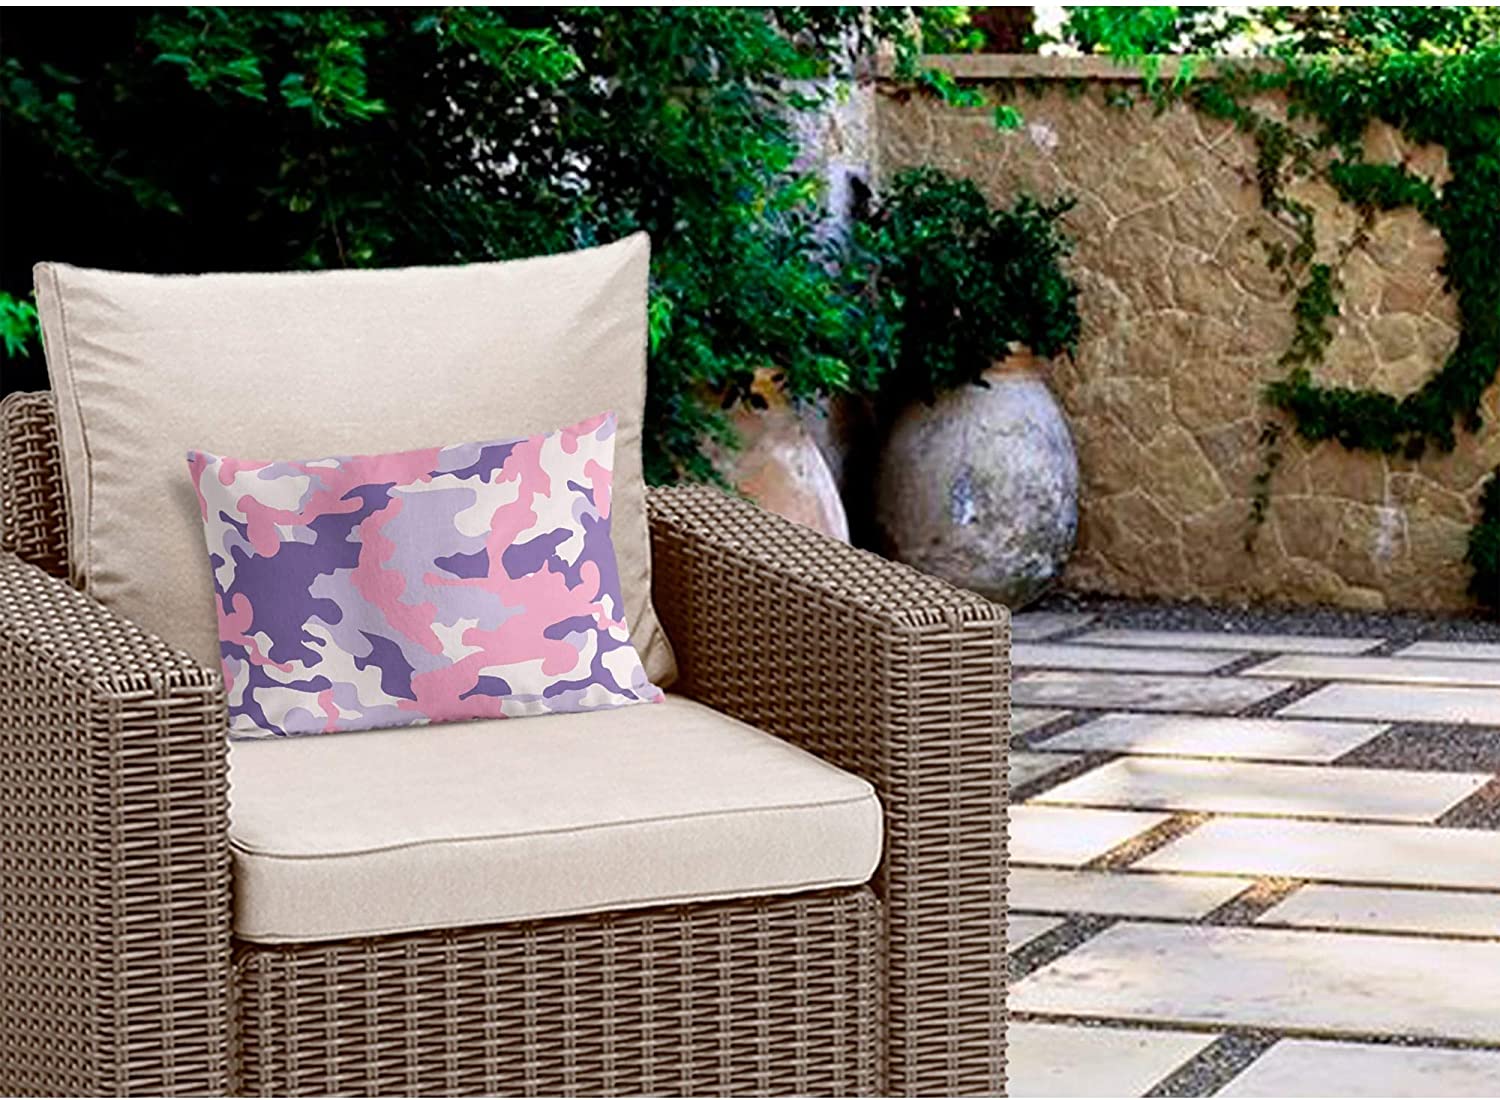 Camo Flow Pink Purple Indoor|Outdoor Lumbar Pillow 20x14 Pink Geometric Modern Contemporary Polyester Removable Cover